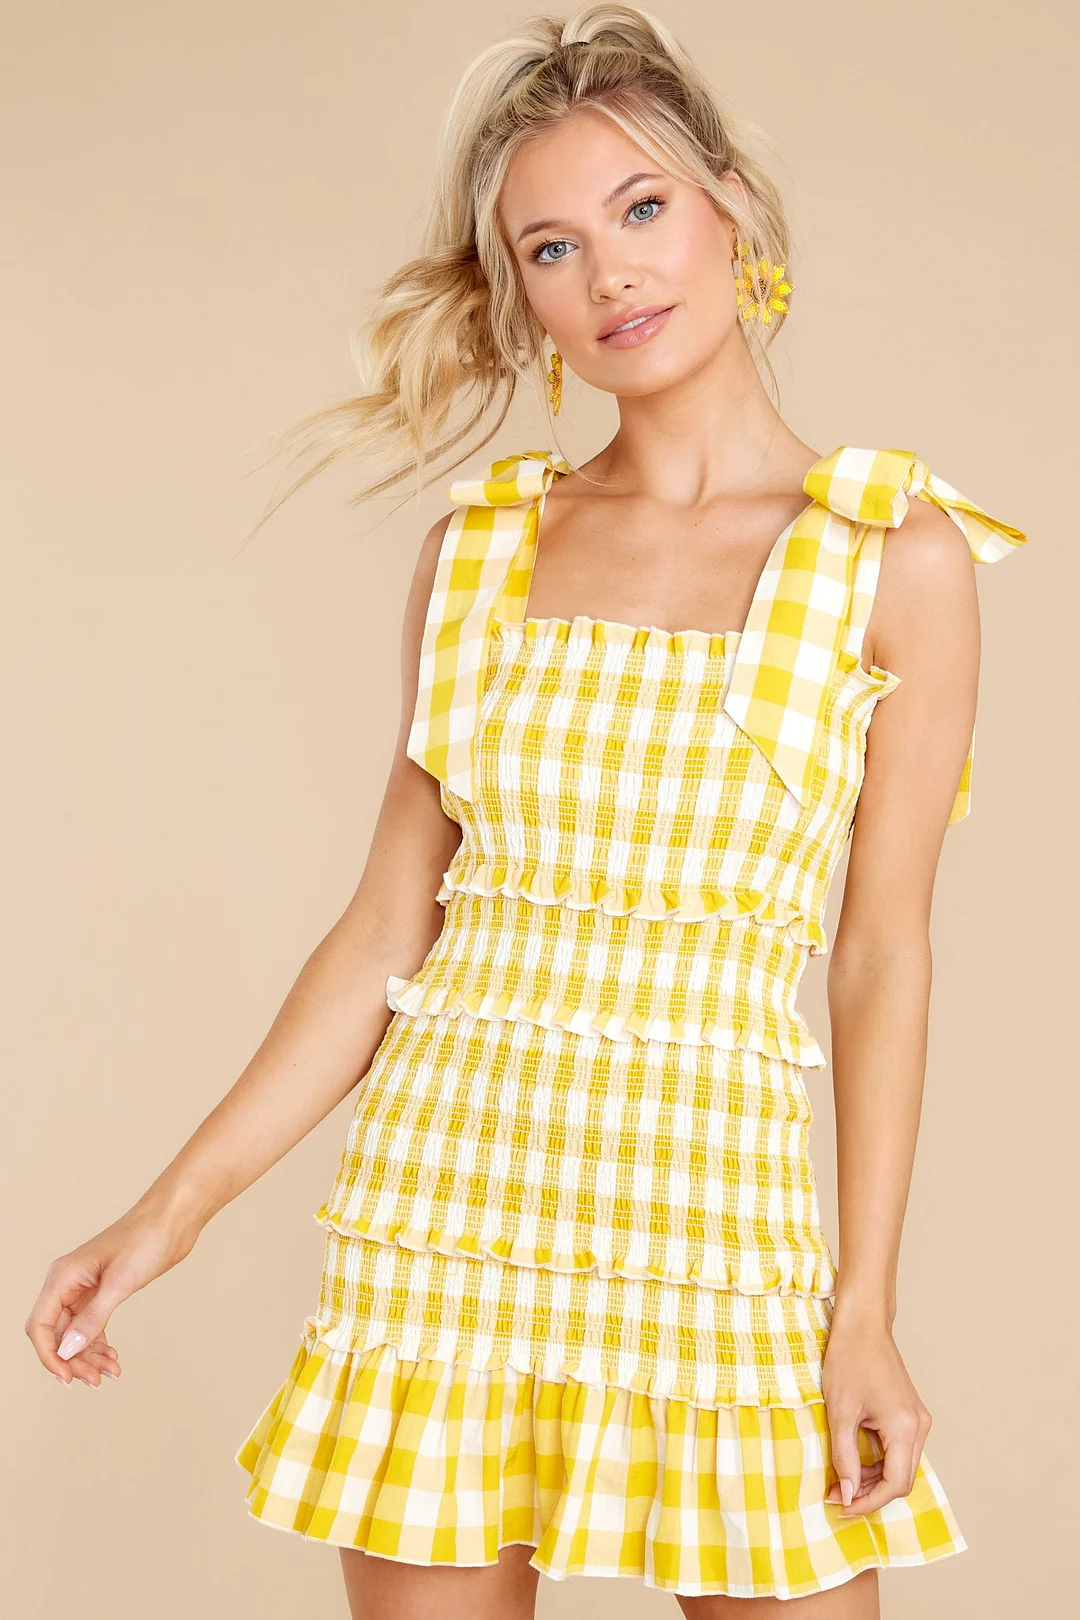 Right About You Yellow Gingham Dress